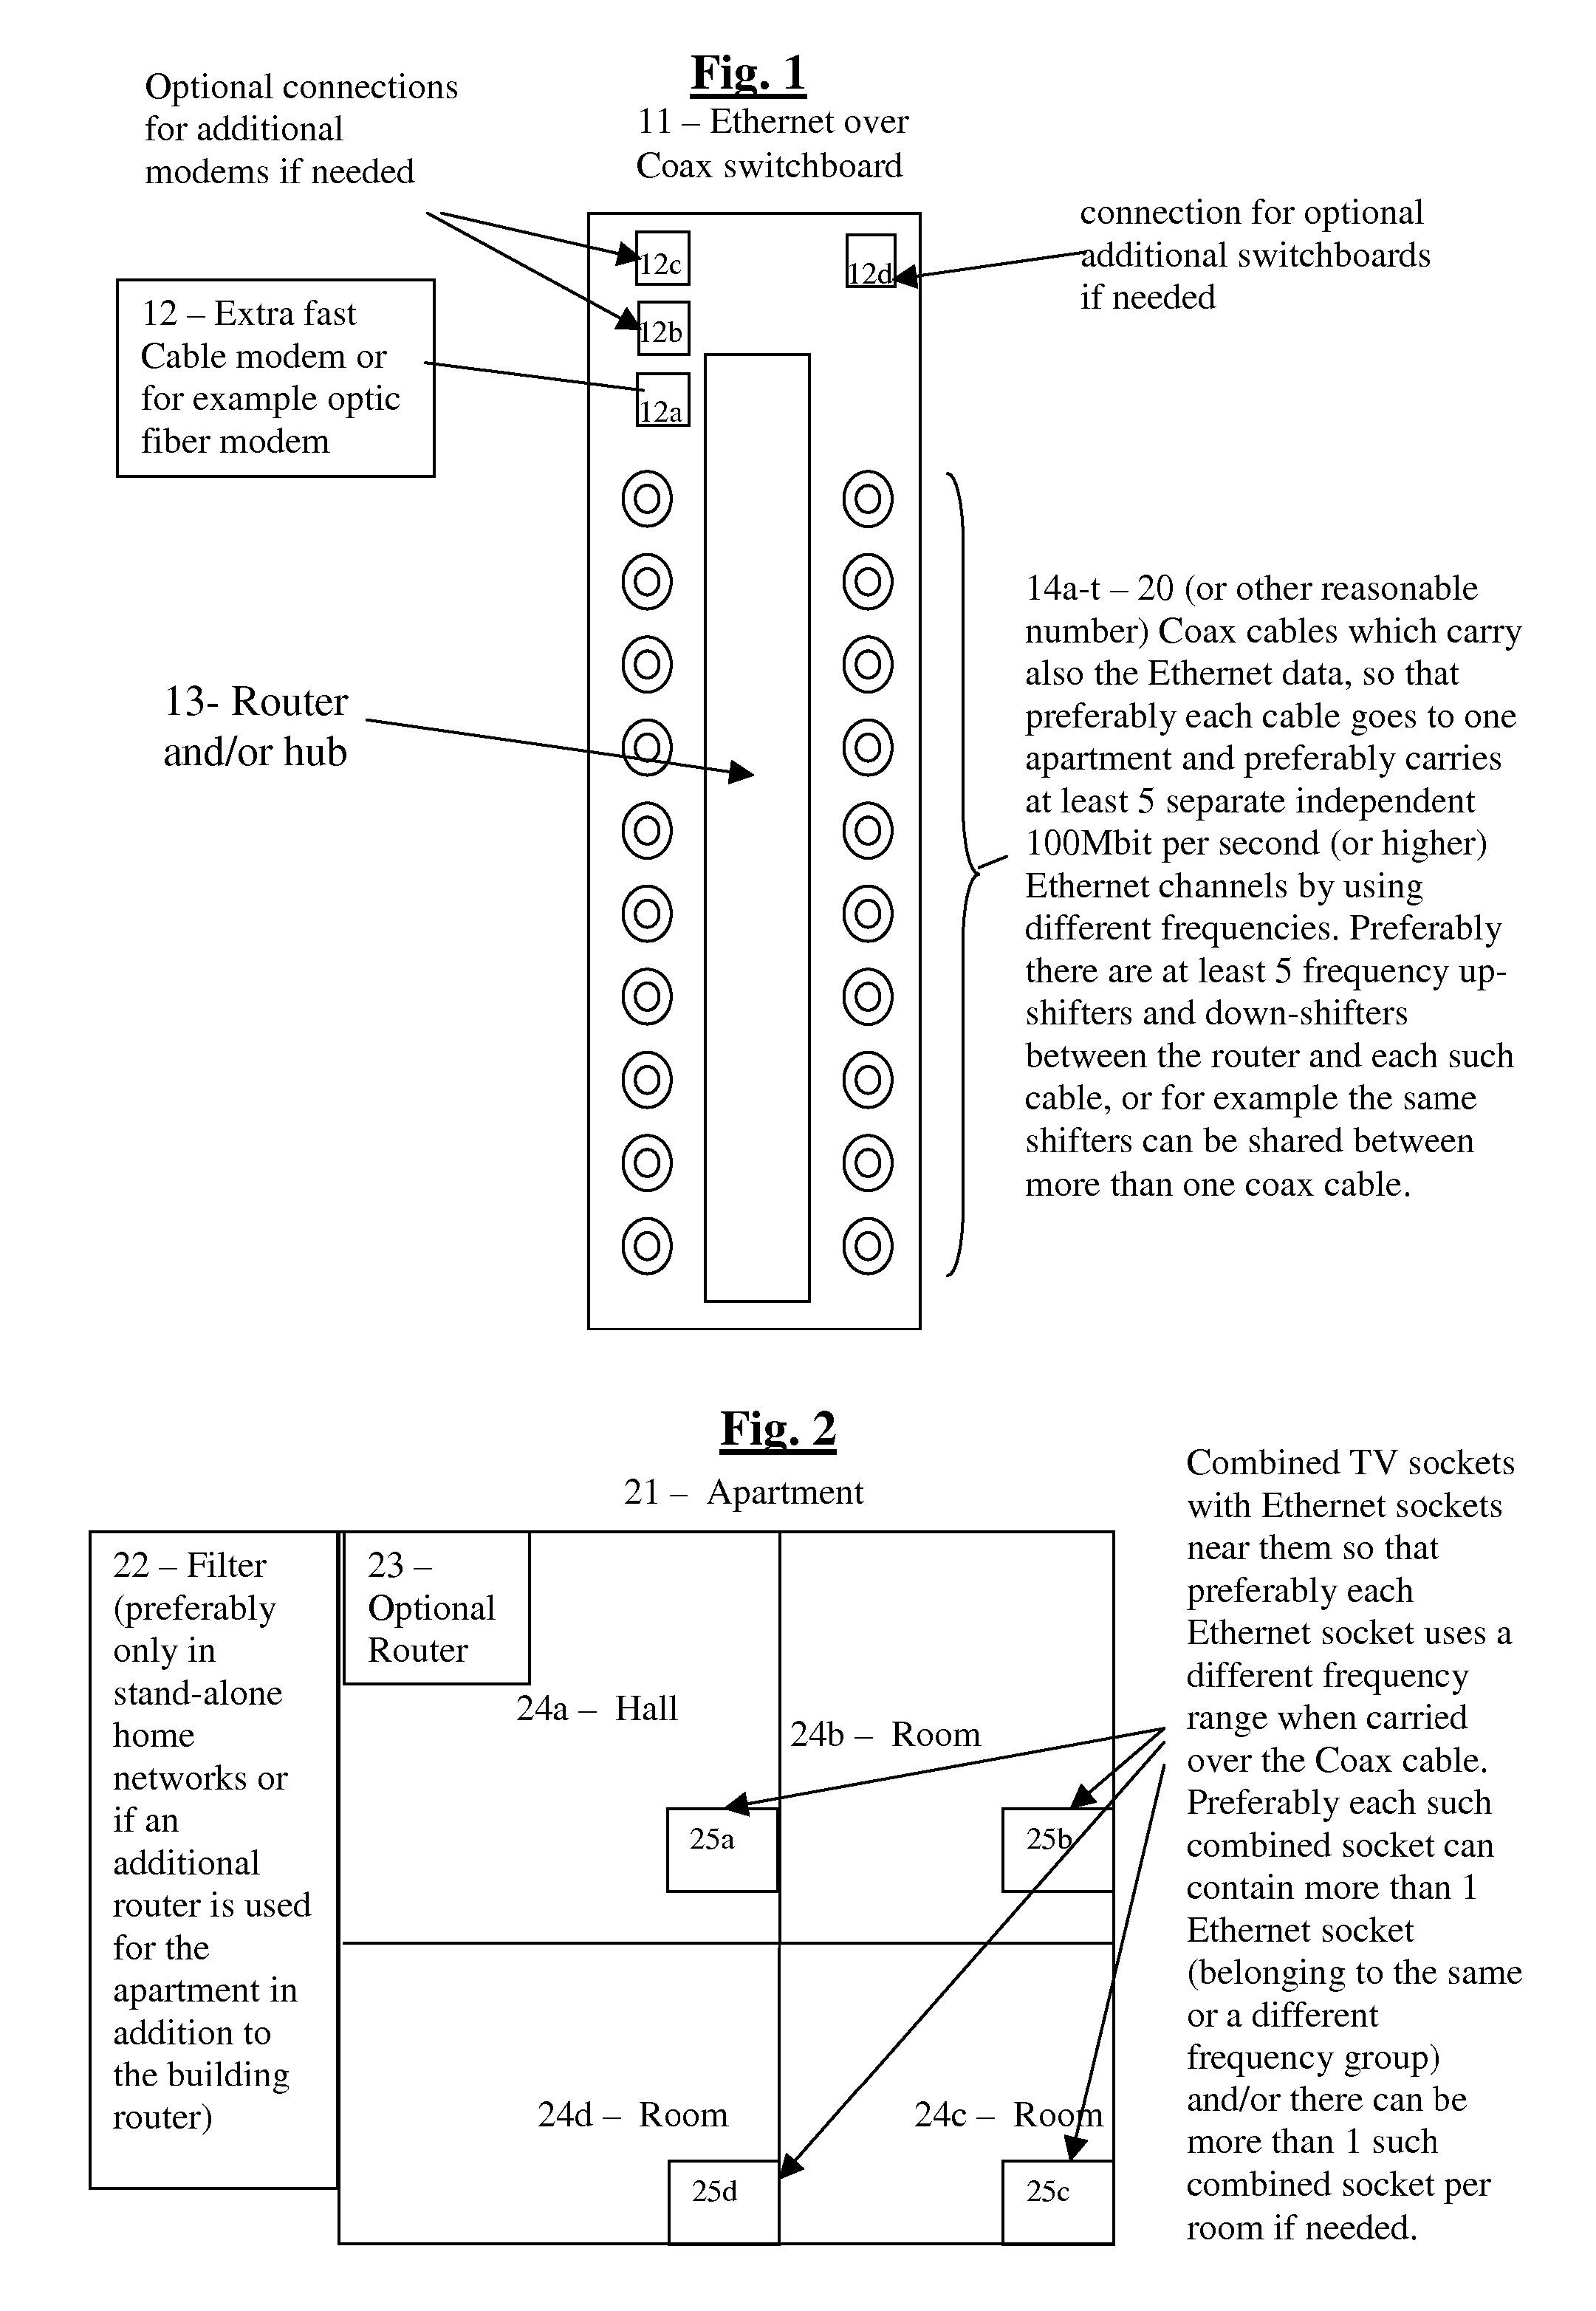 System and method for creating cheap efficient high-speed home networks.